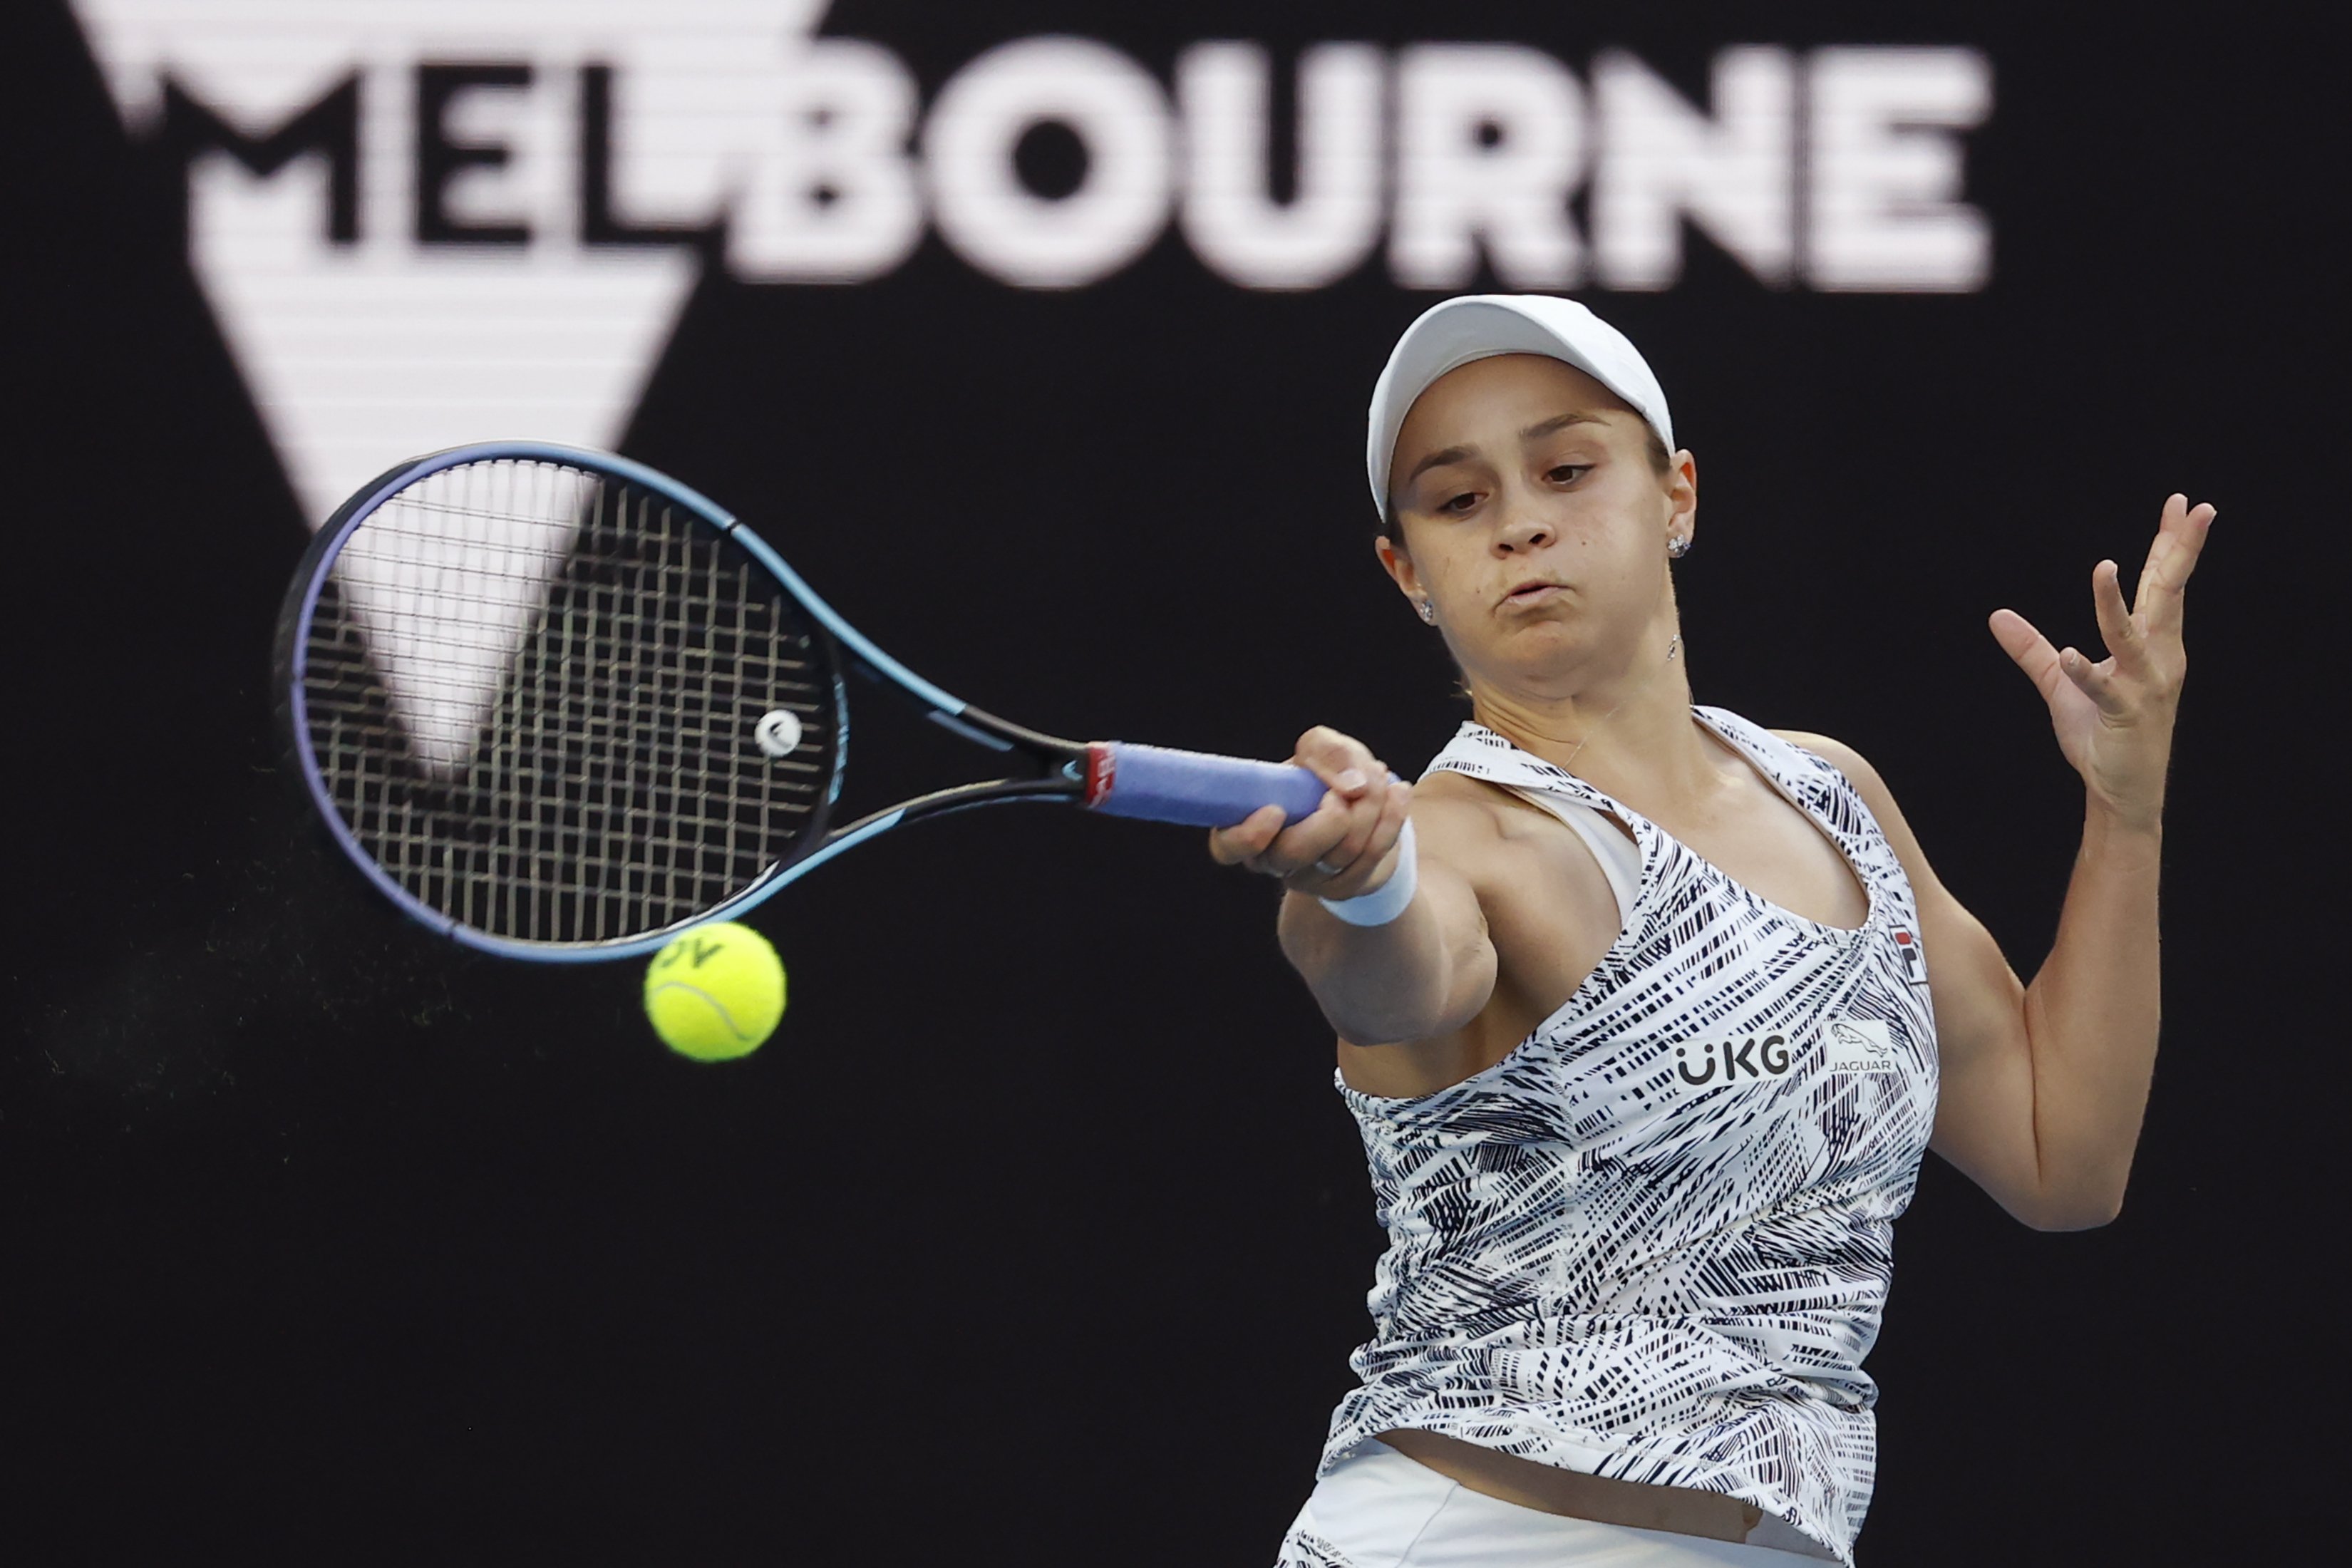 Australian Open Chinas women make strong start in Melbourne, while Nadal, Osaka and Barty all win